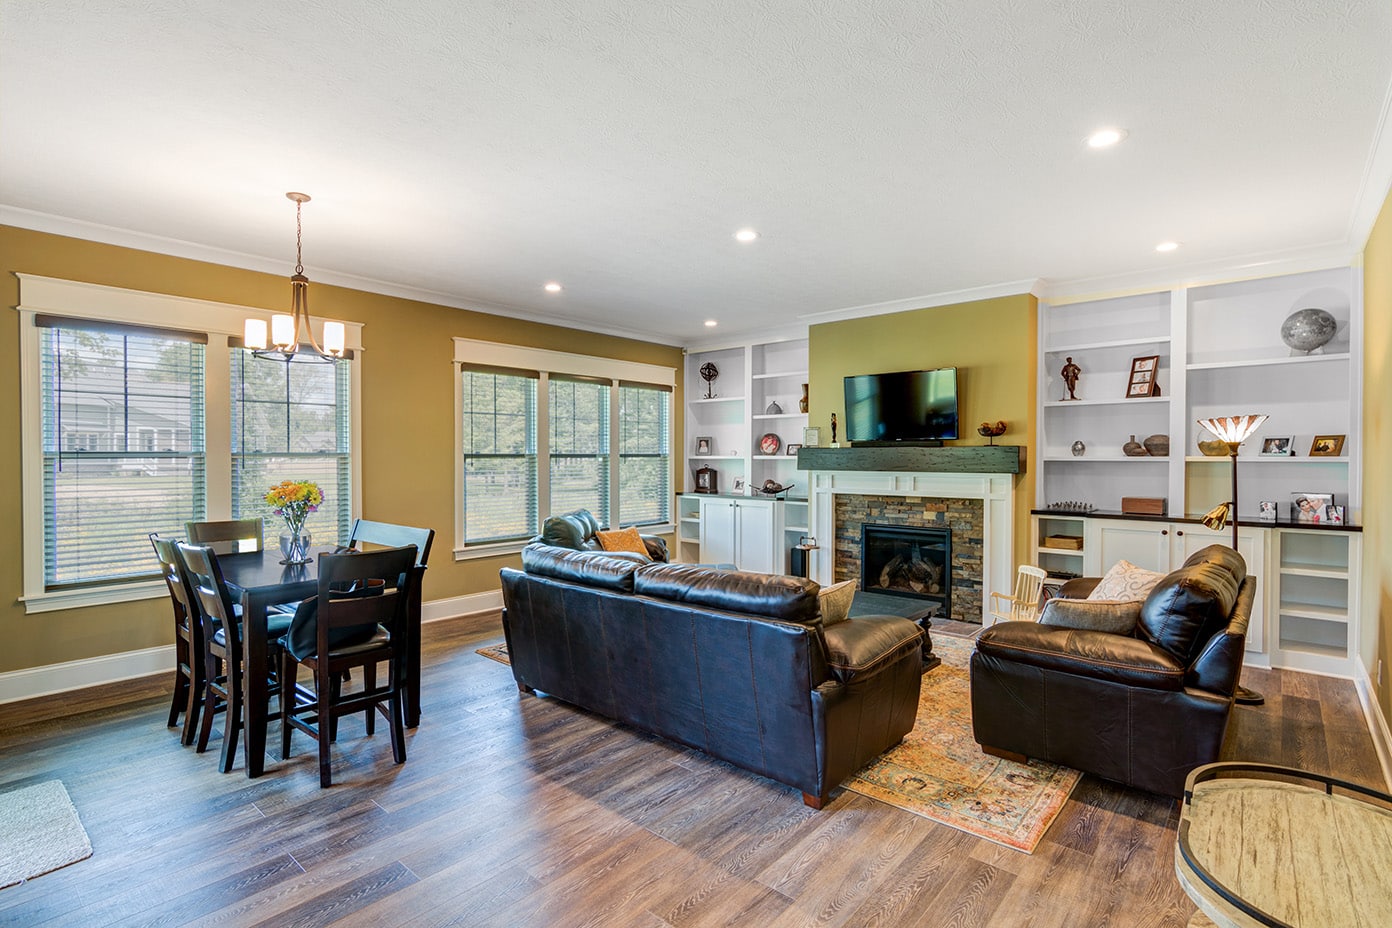 A living room with hardwood floors and a fireplace in a custom home.